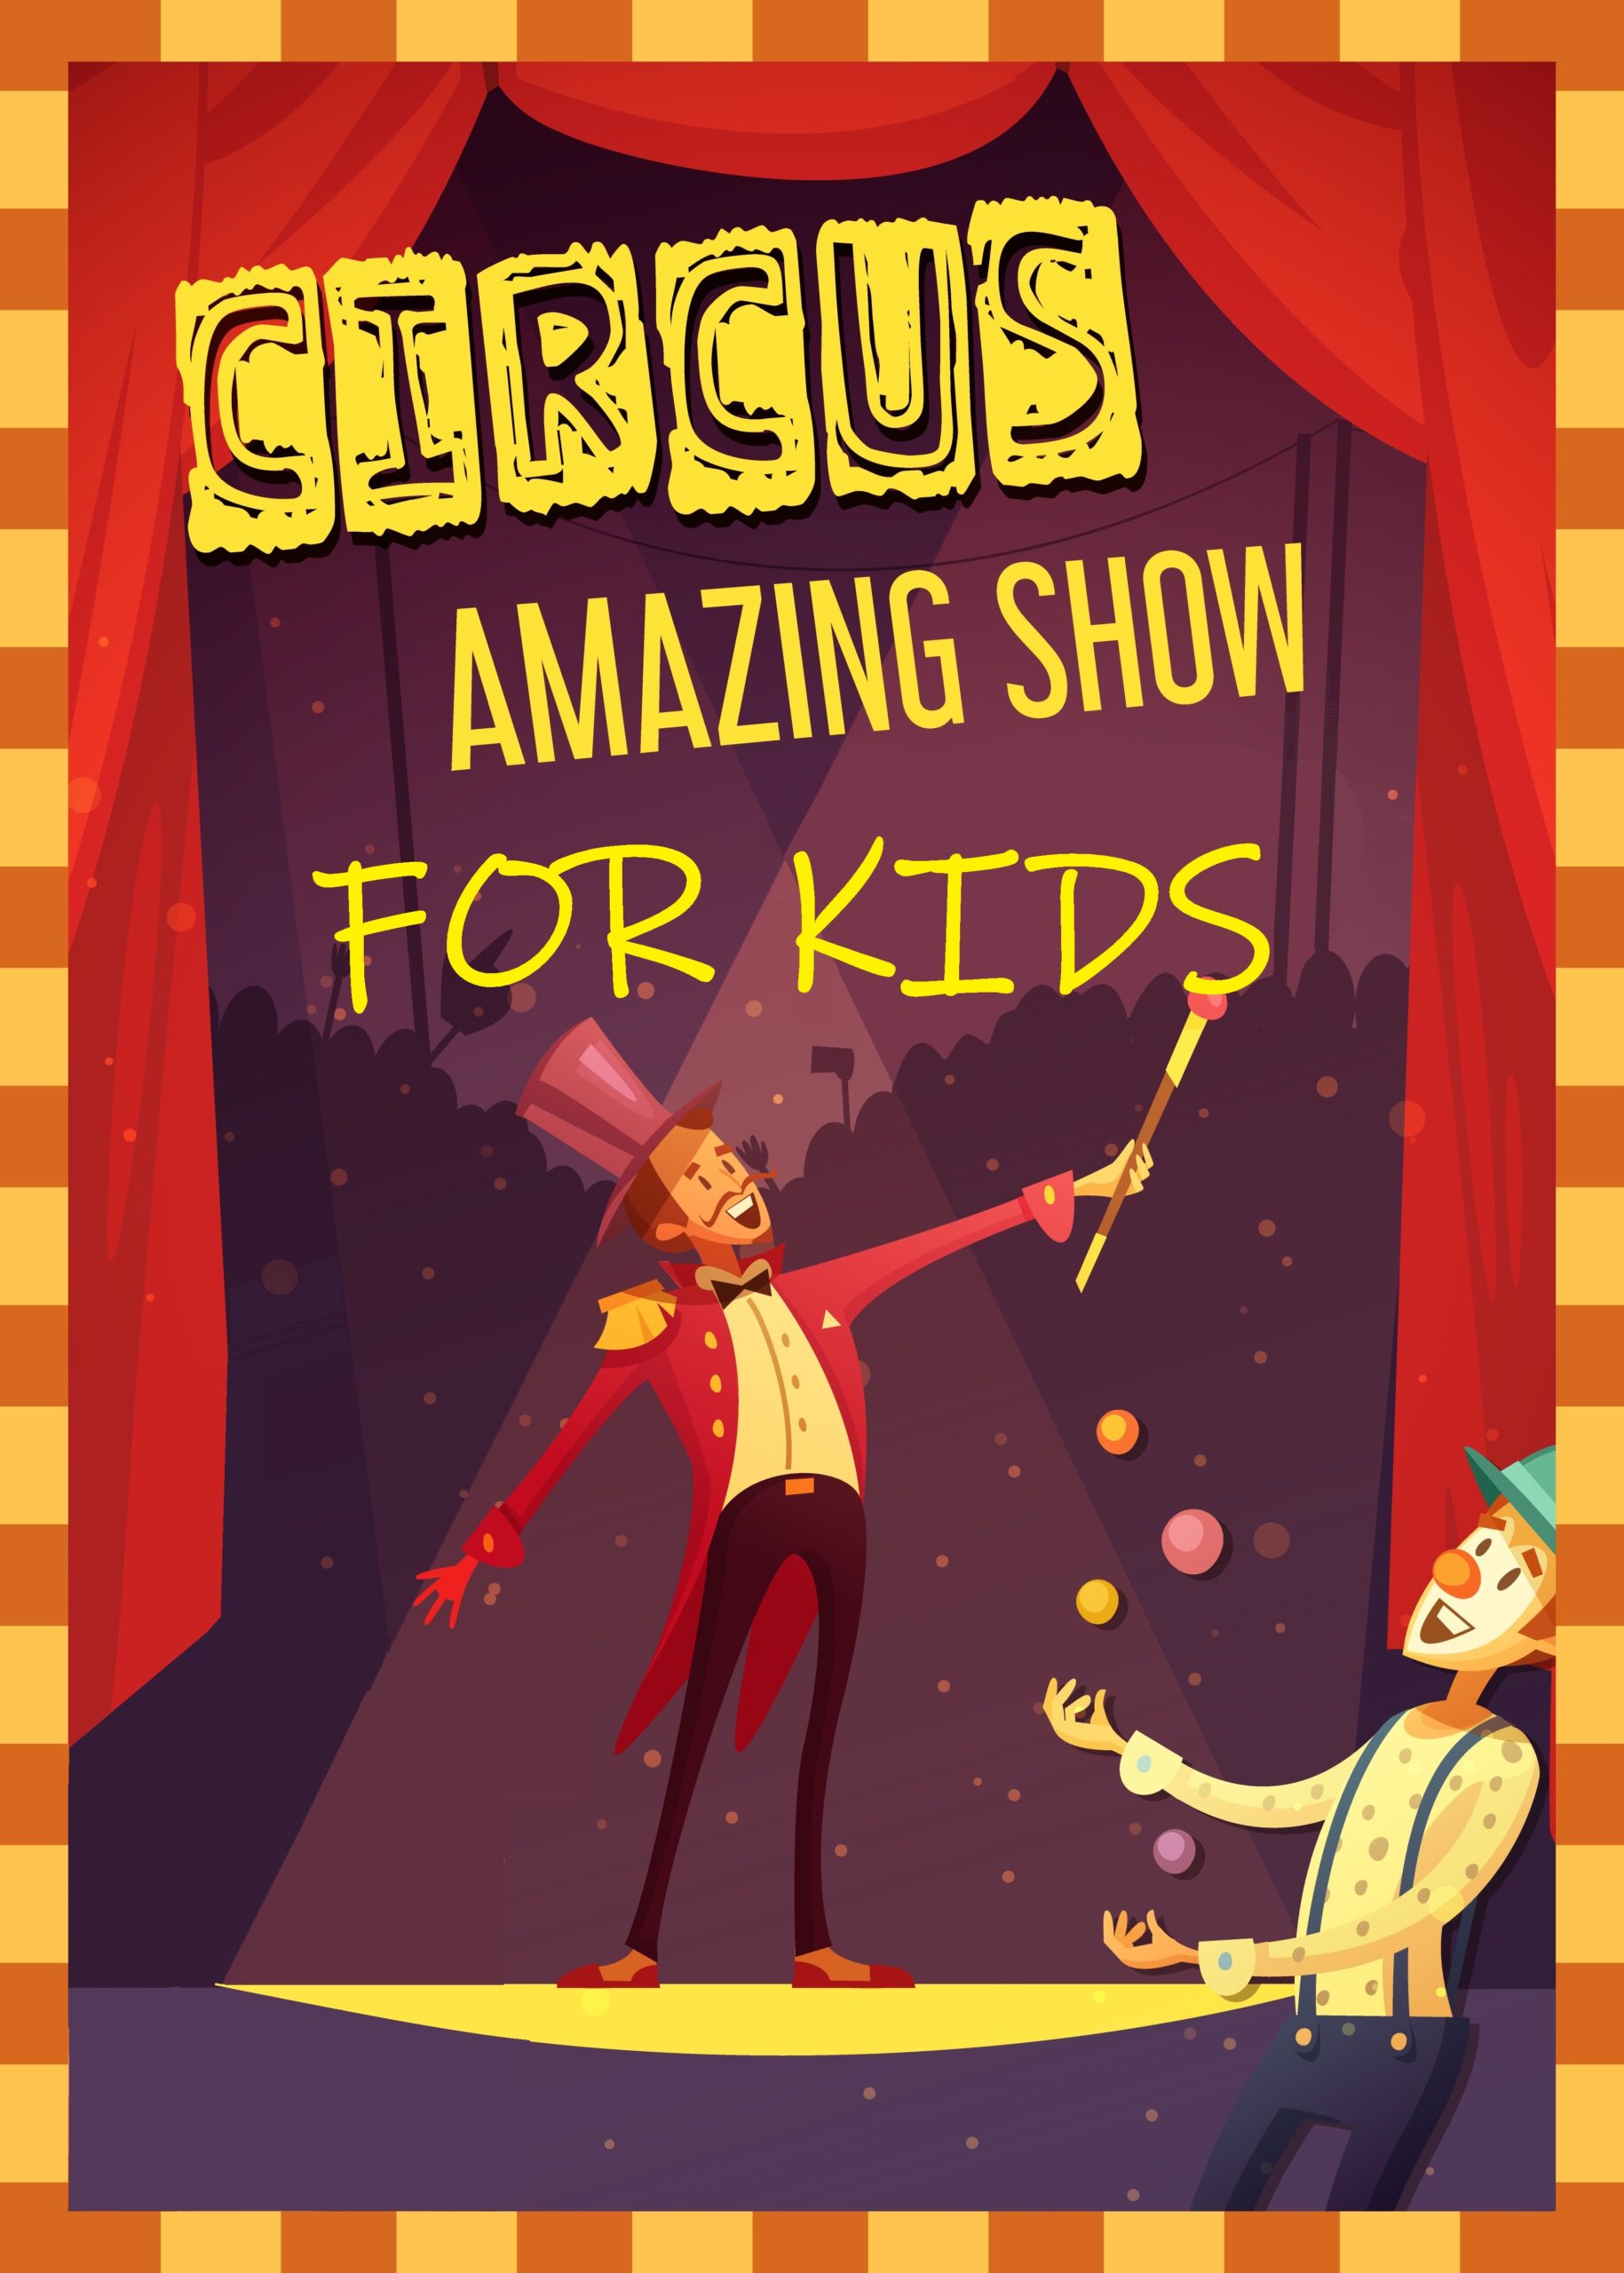 Traveling chapiteau circus show announcement retro cartoon style poster print with clown and magician performance vector illustration